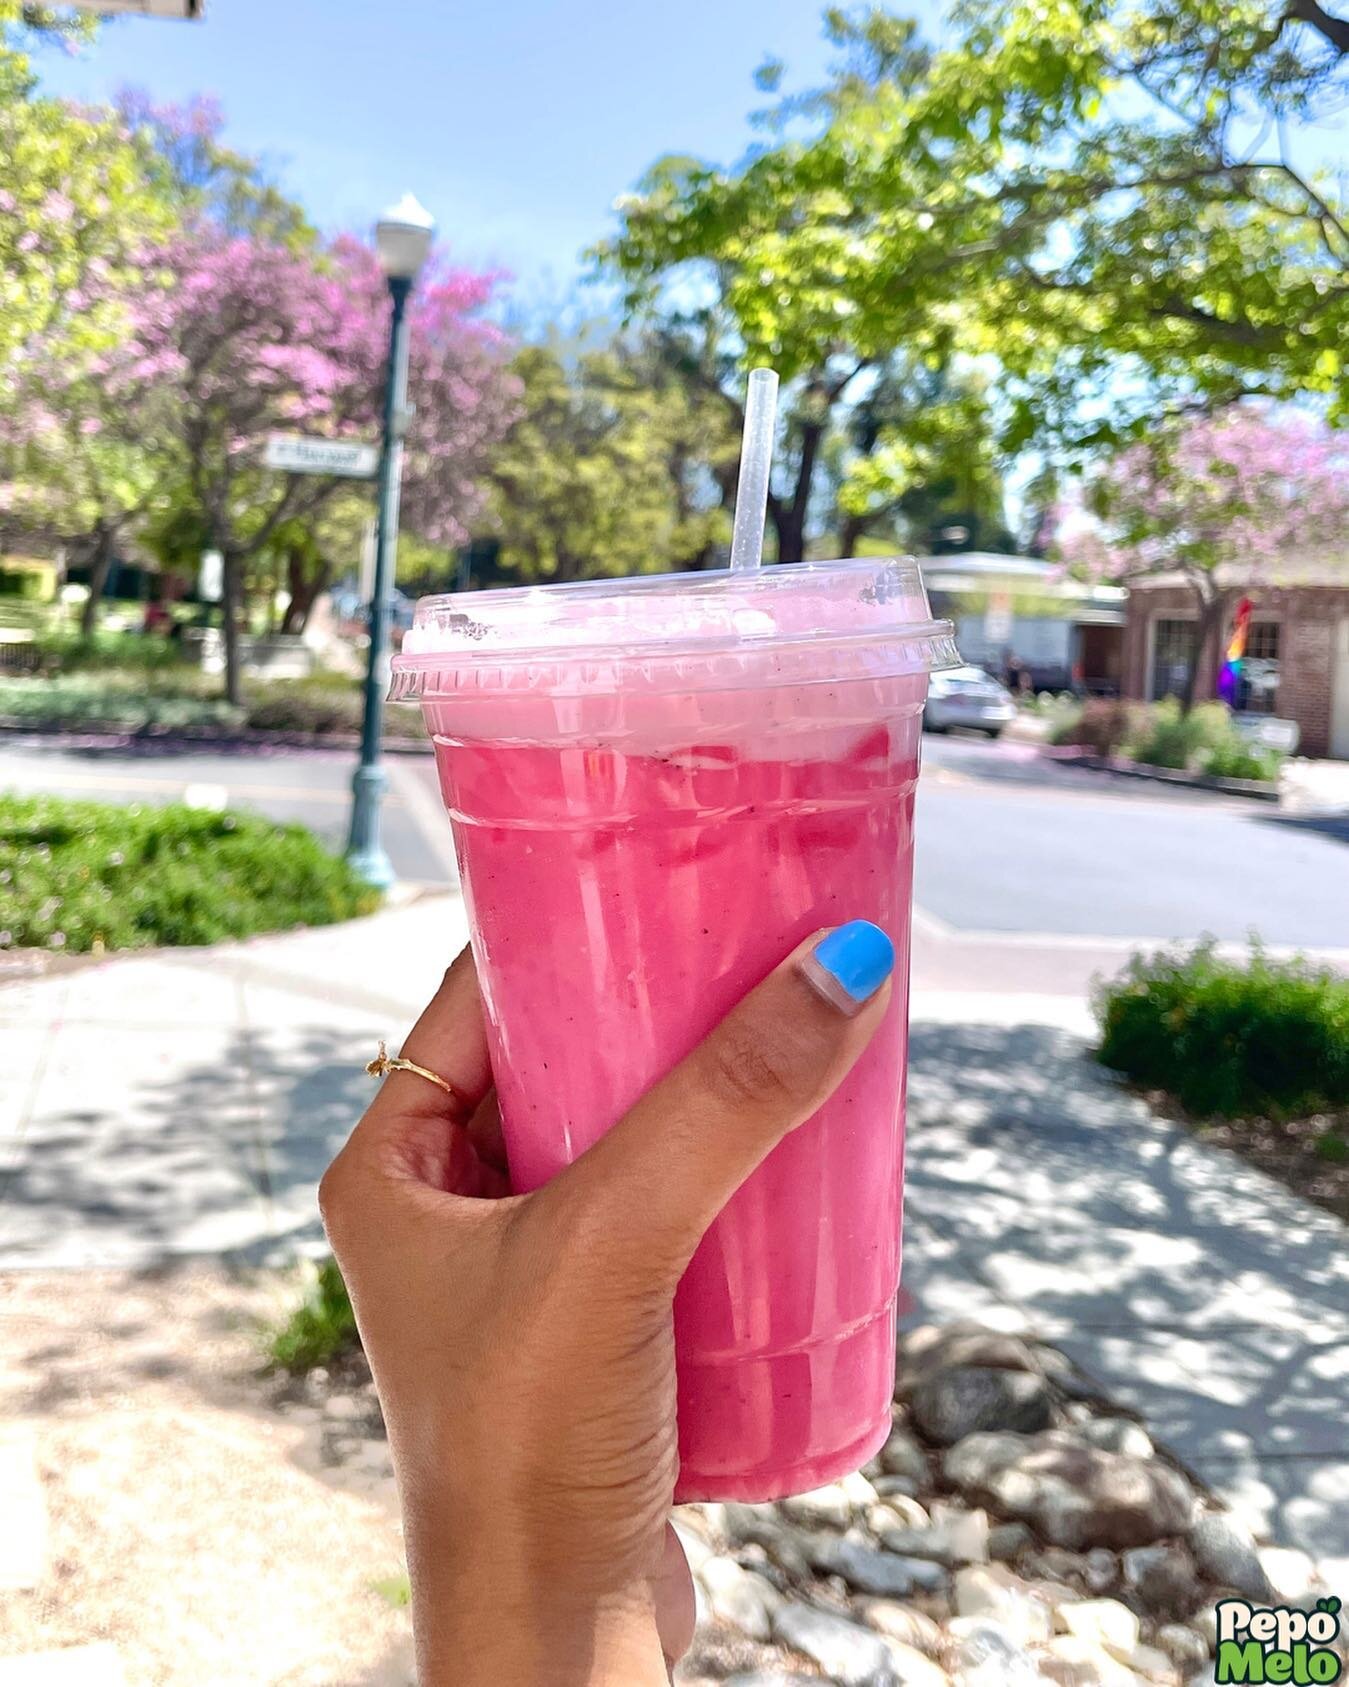 Pink Drink is unmatched 🙌🏼
➡️We reached 10K followers before Sunday, which means $2 bowls every day next week!! Stay tuned for details on our story 🤗
🍓
Tag us in your posts and stories for a chance to be featured!📱
🥝
Upland store: 659 W. Foothi